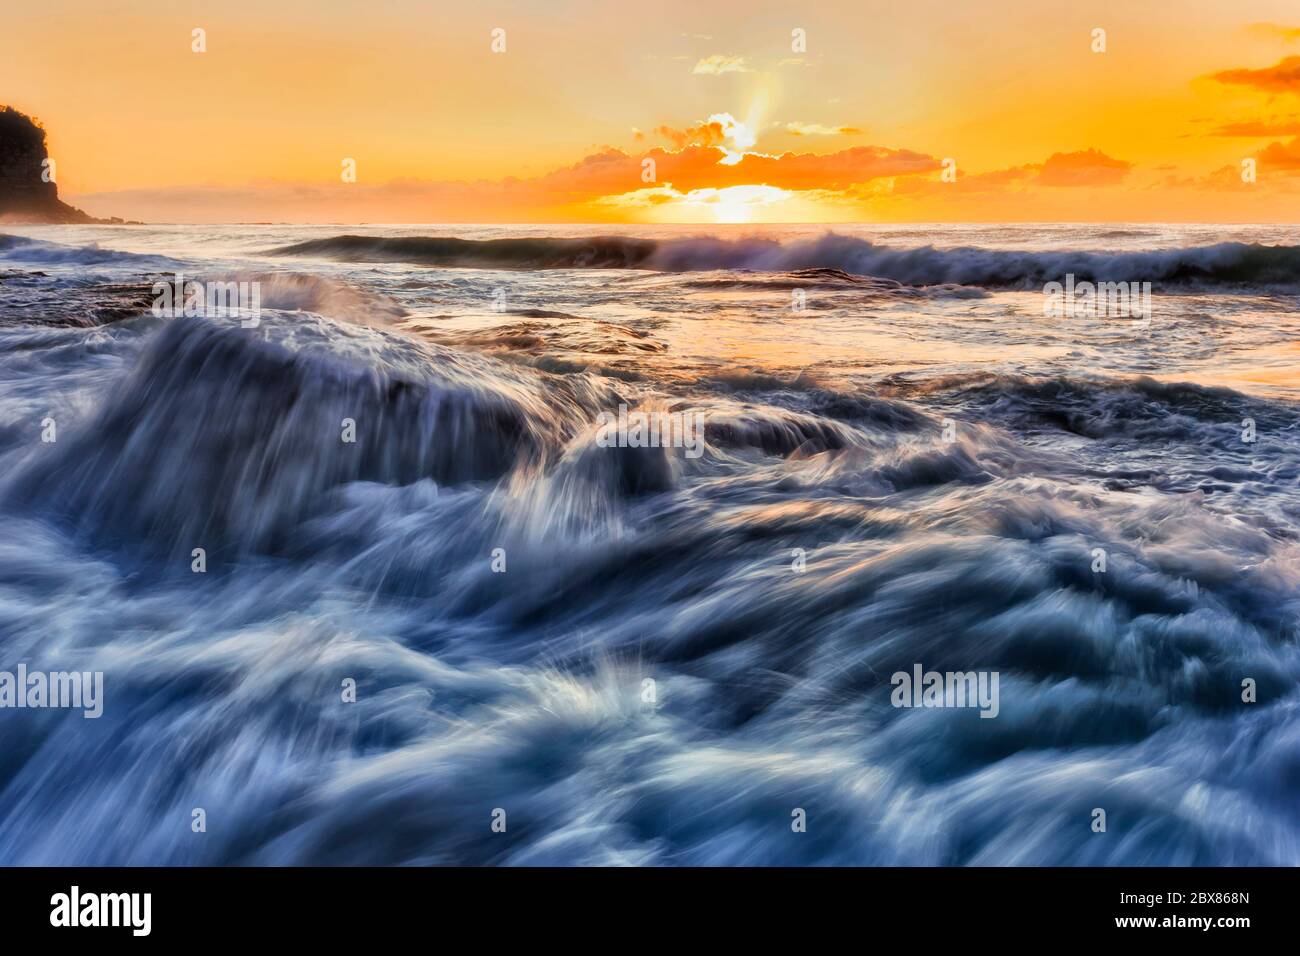 Stormy waves of Pacific ocean at sunrise against hot orange sun rollling over rocks in NOrthern beaches of Sydney. Stock Photo